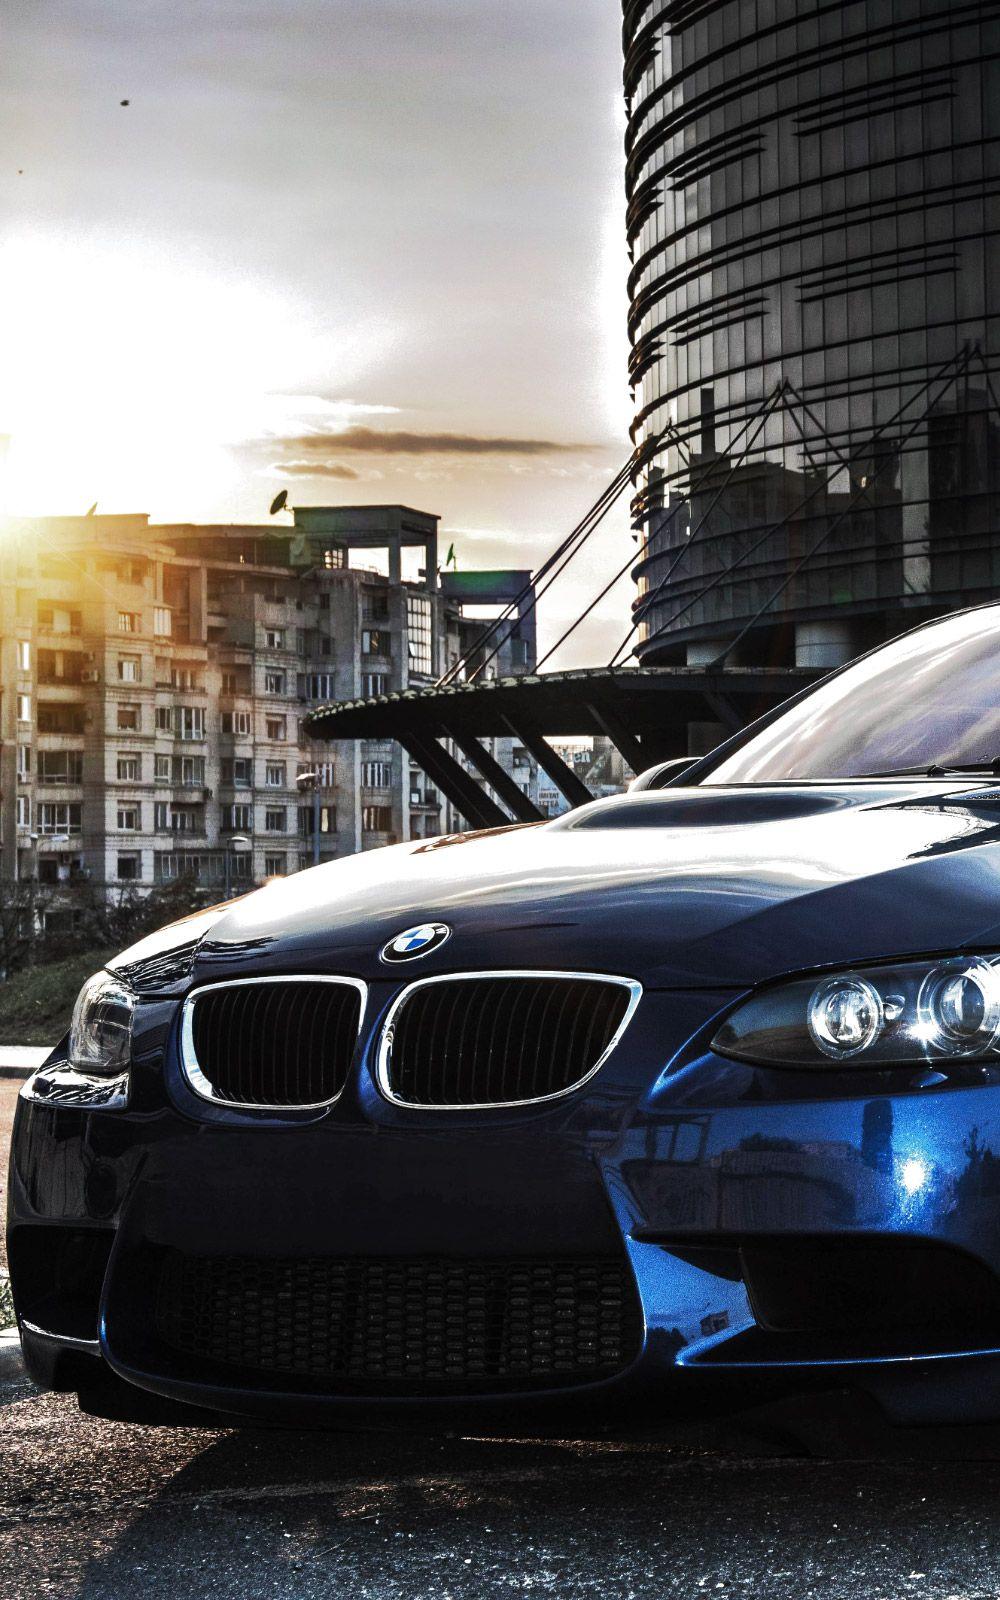 Wallpaper for mobile, Bmw cars and BMW. Car